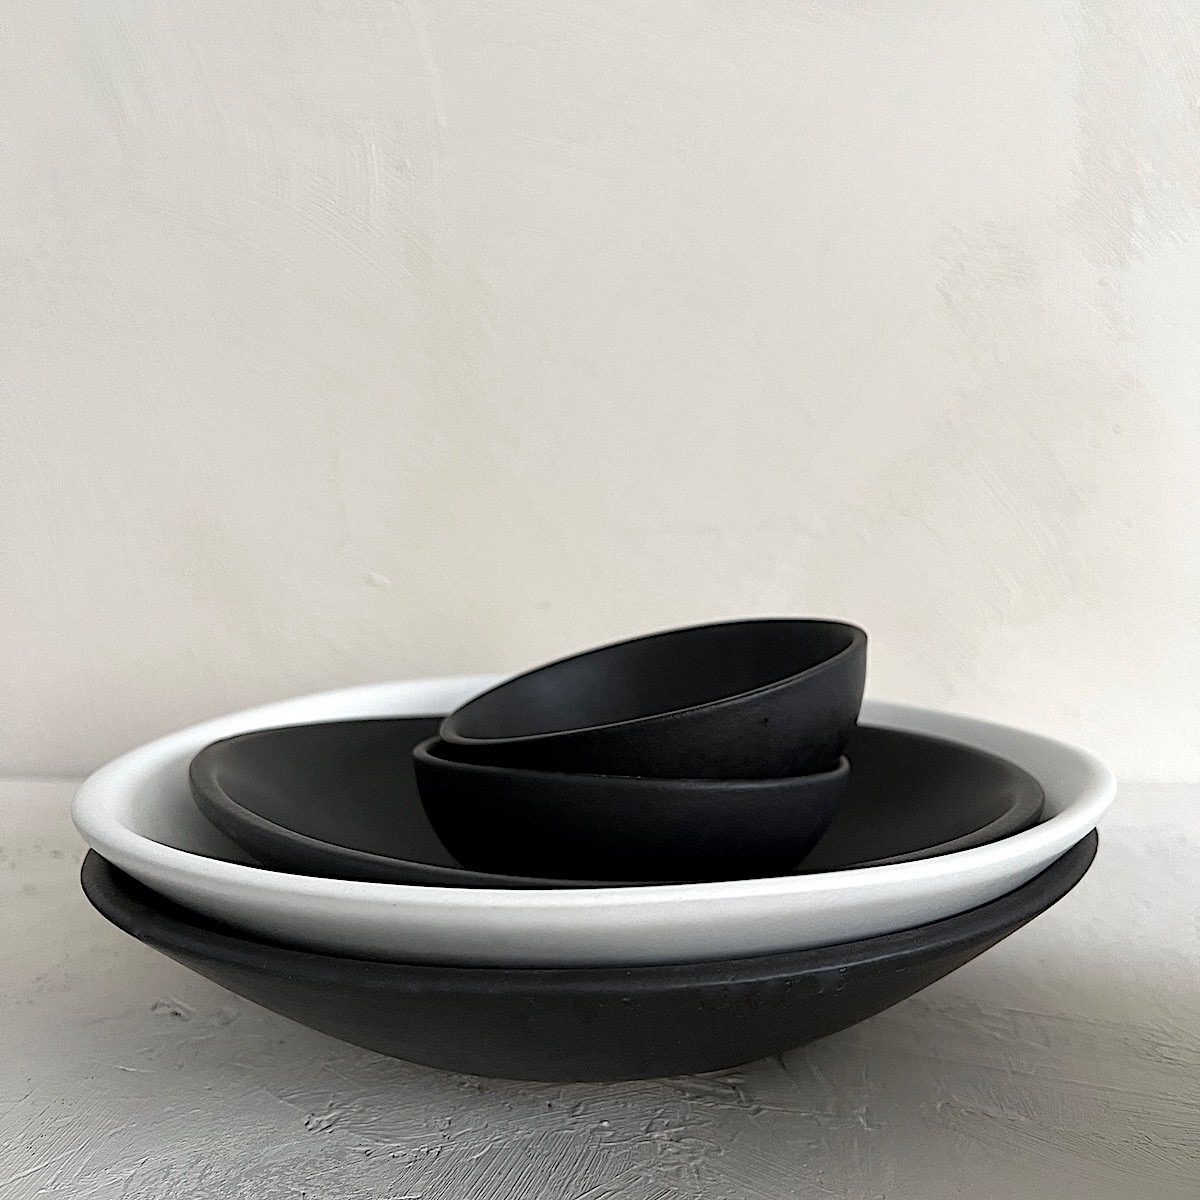 Table setting with black Stoneware | shop update